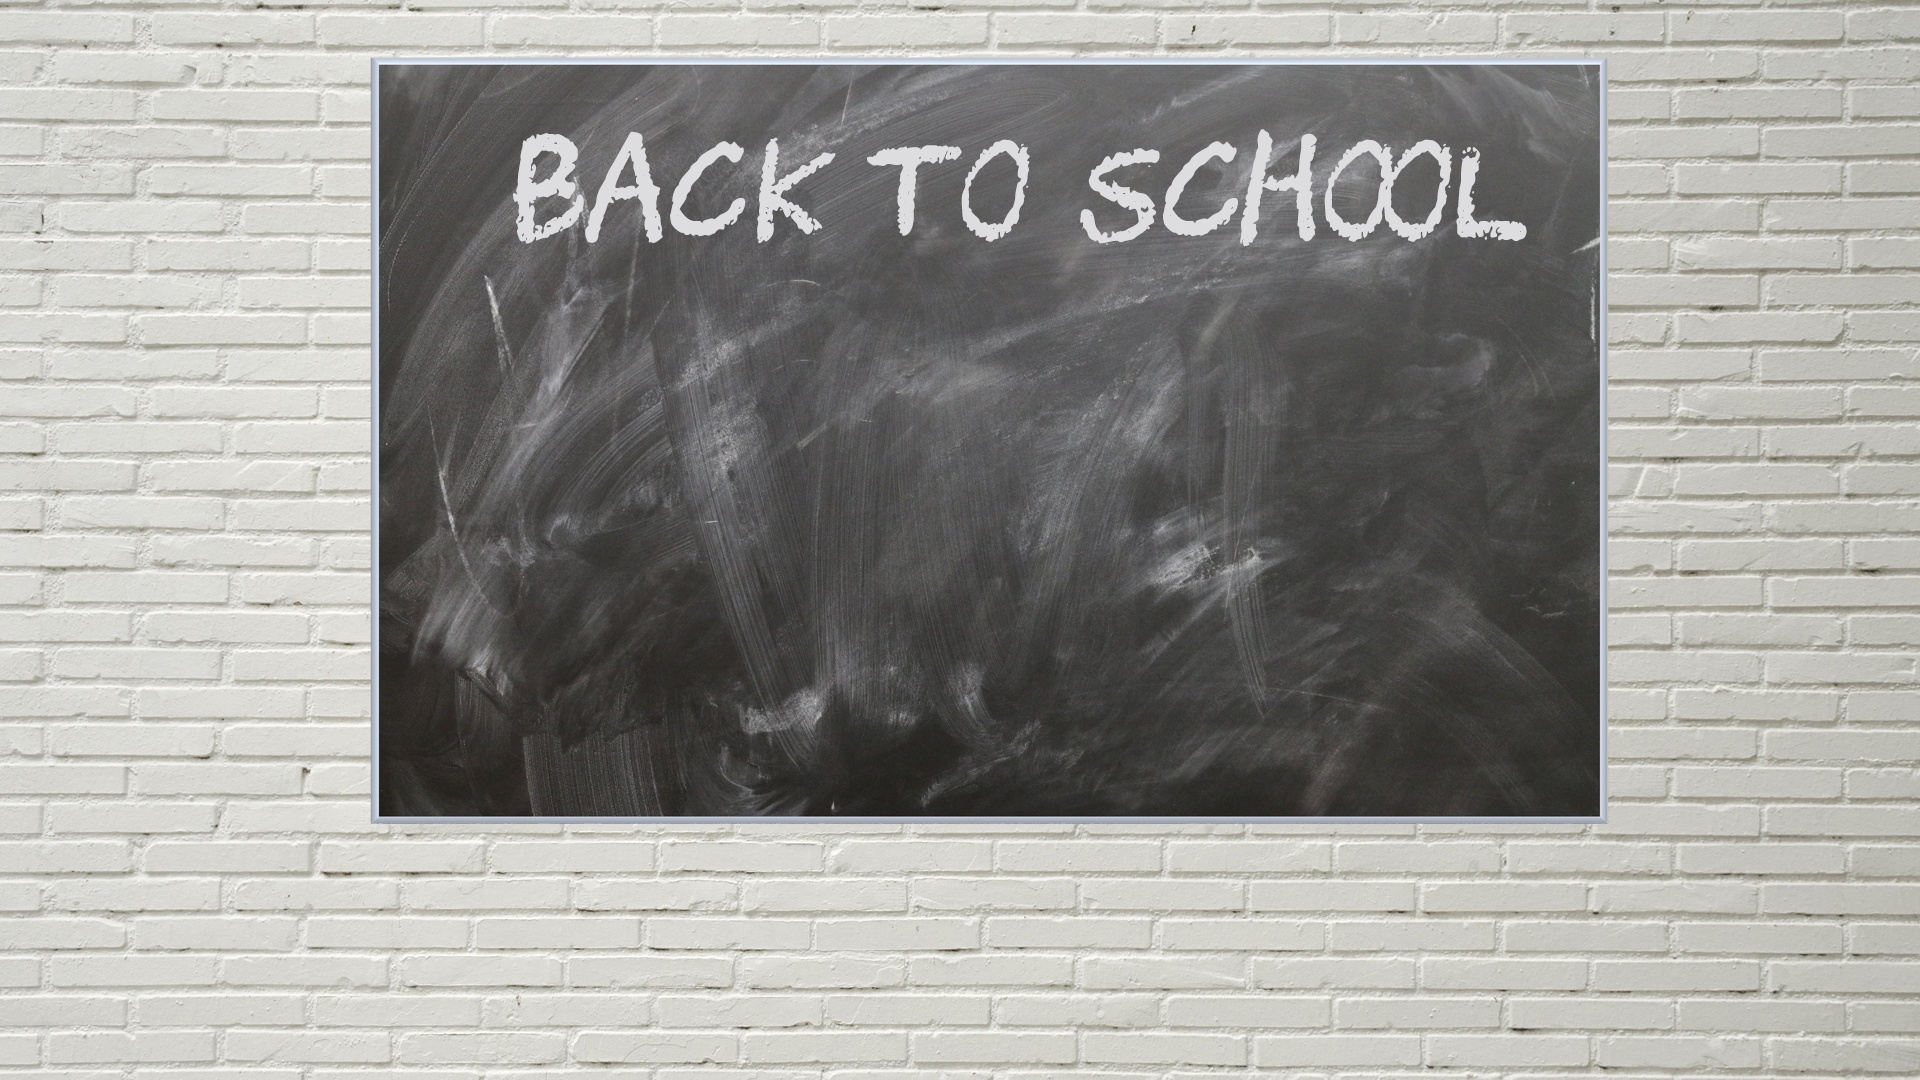 Back to School background with copy space. This image is free for download and use on commerical or personal projects